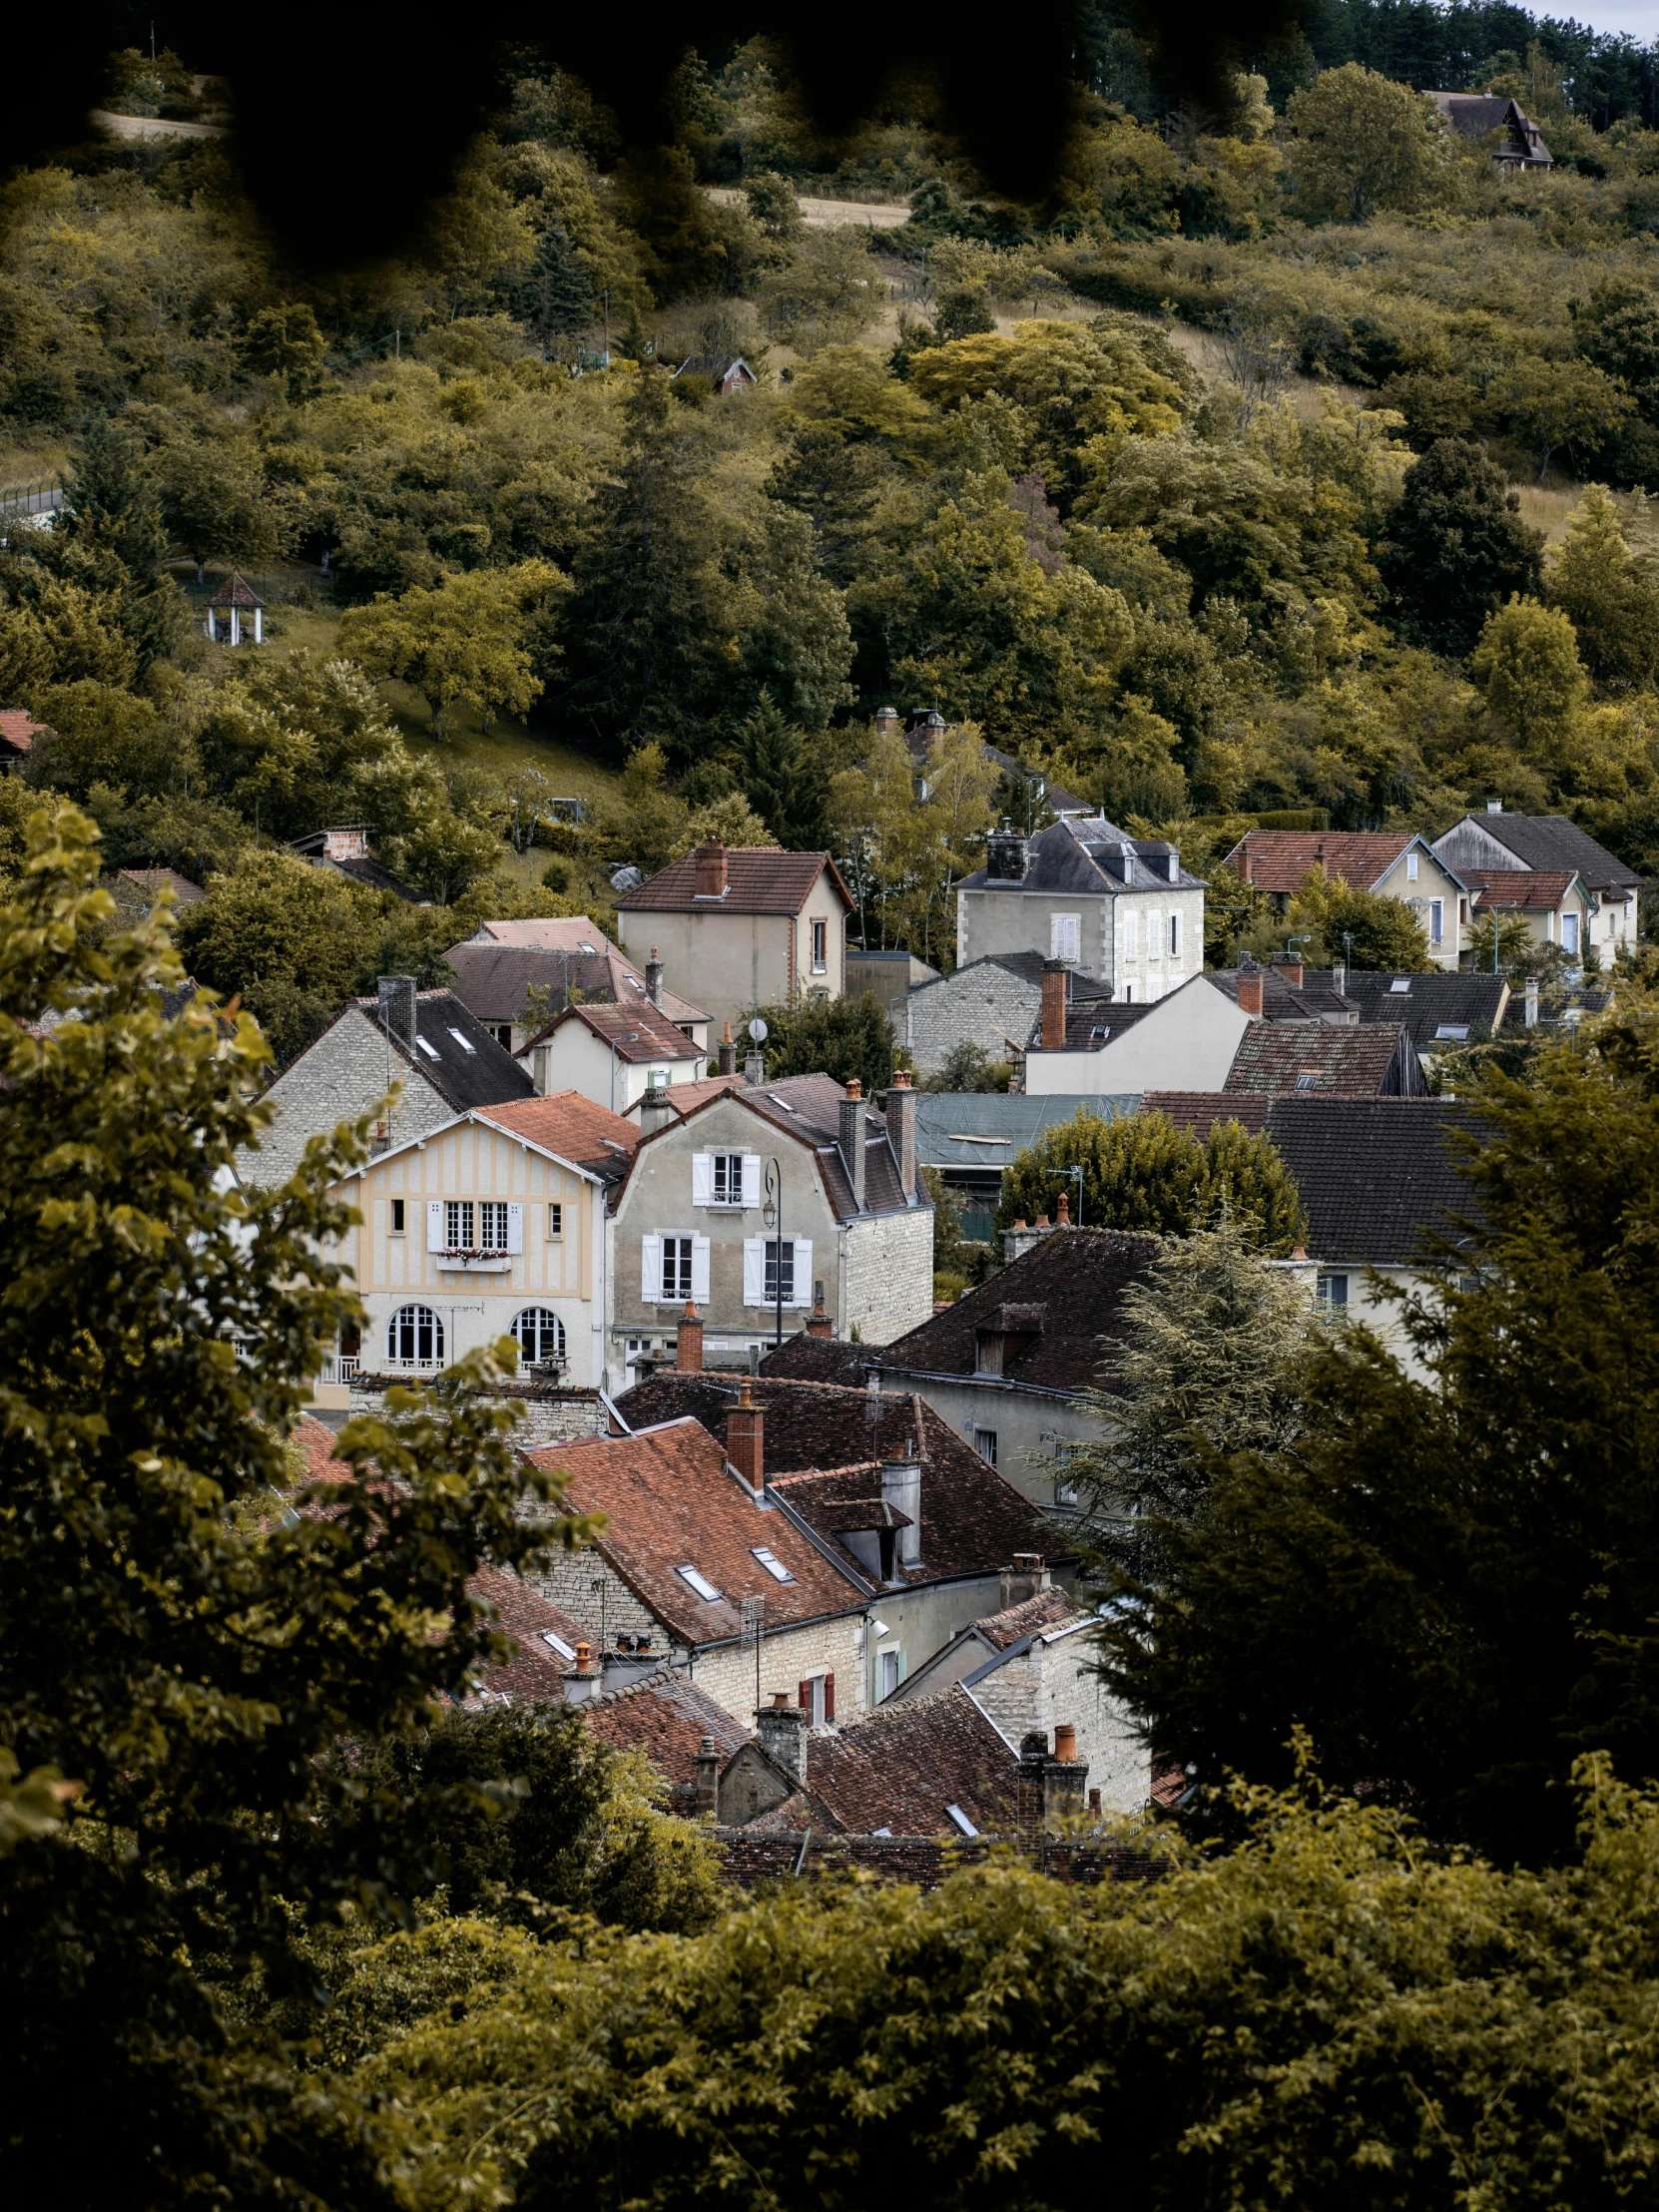 a group of houses sitting on top of a lush green hillside, by Raphaël Collin, pexels contest winner, les nabis, pur champagne damery, with dark trees in foreground, slide show, french village interior